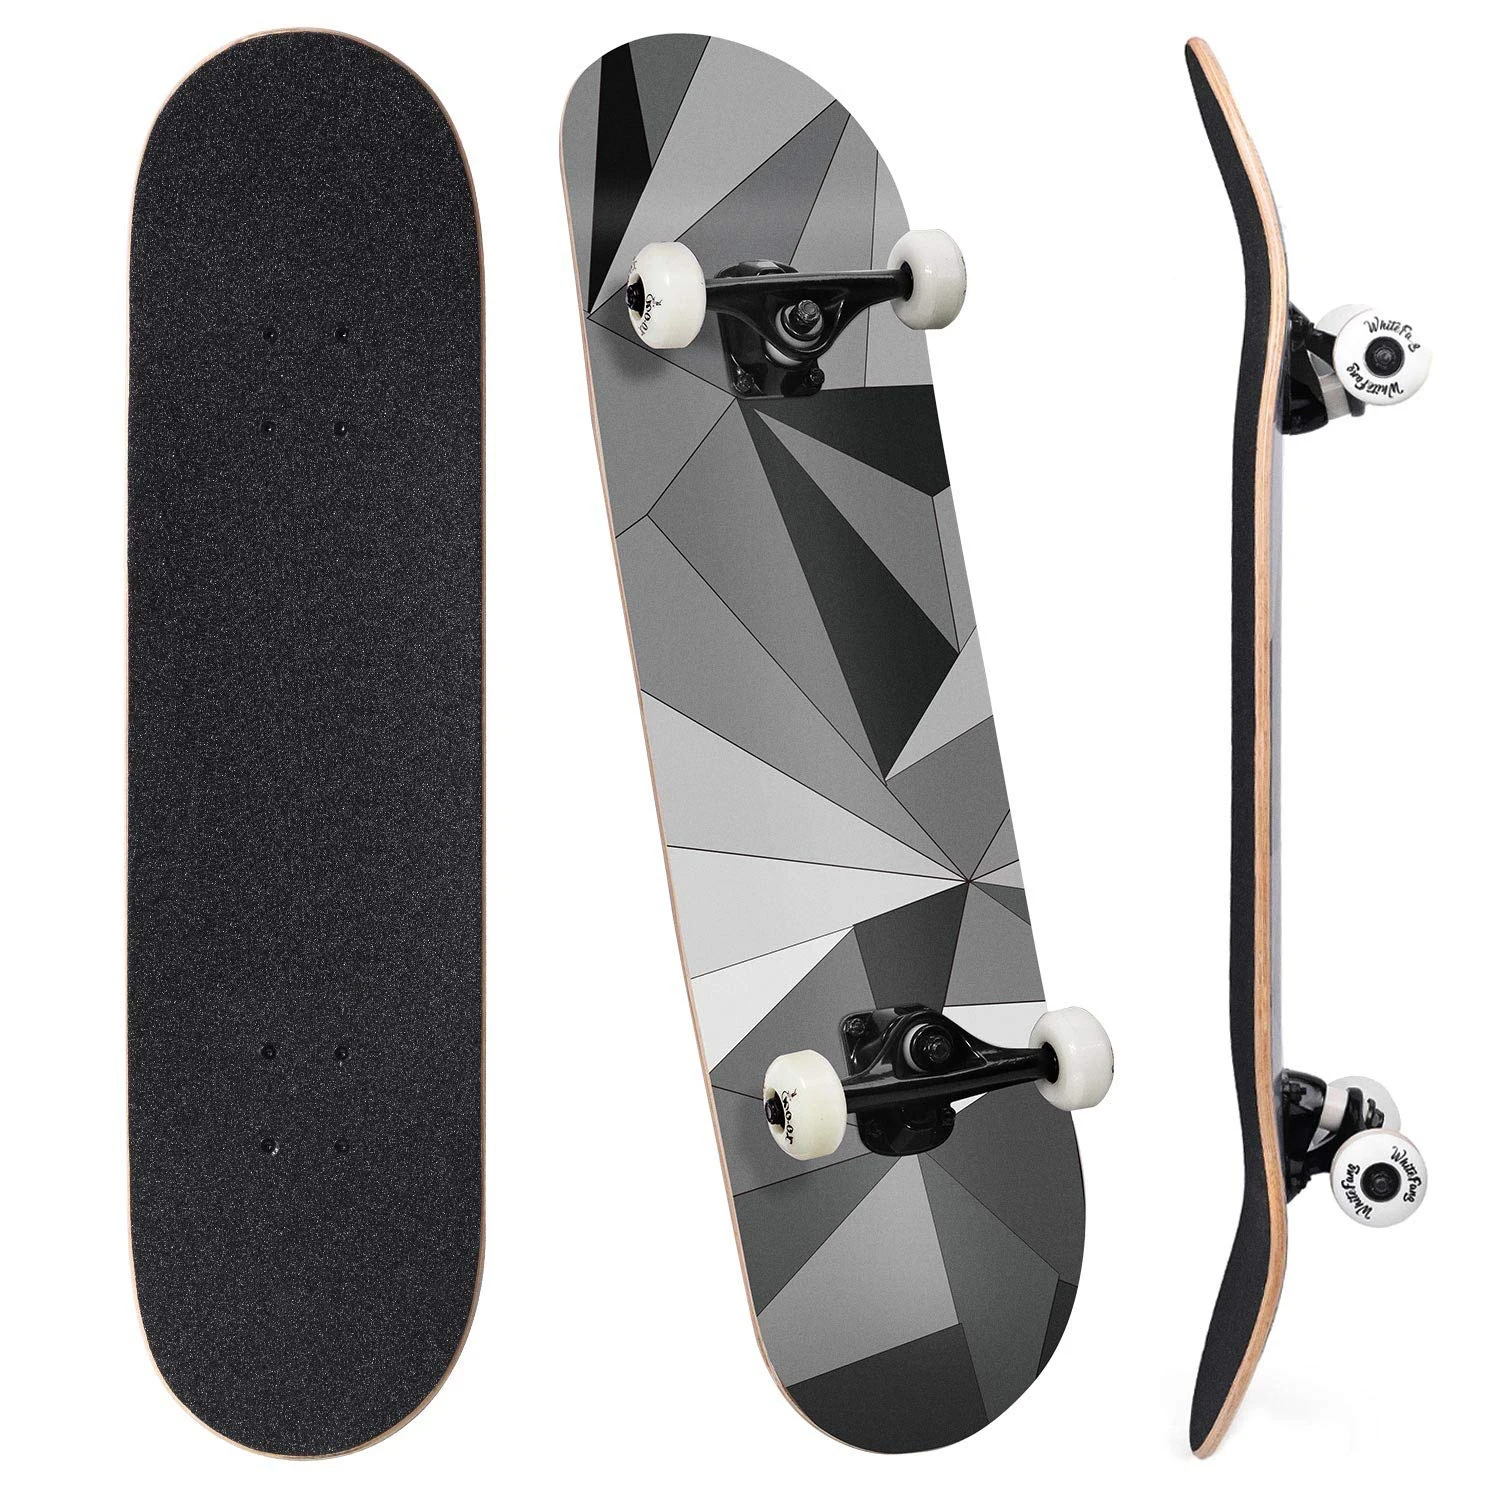 

Skateboards Complete Skateboard 31 x 7.88 for Kids, Youths, Teens, Beginners, and Adults, 7 Layers Radial Concave Standard Canad